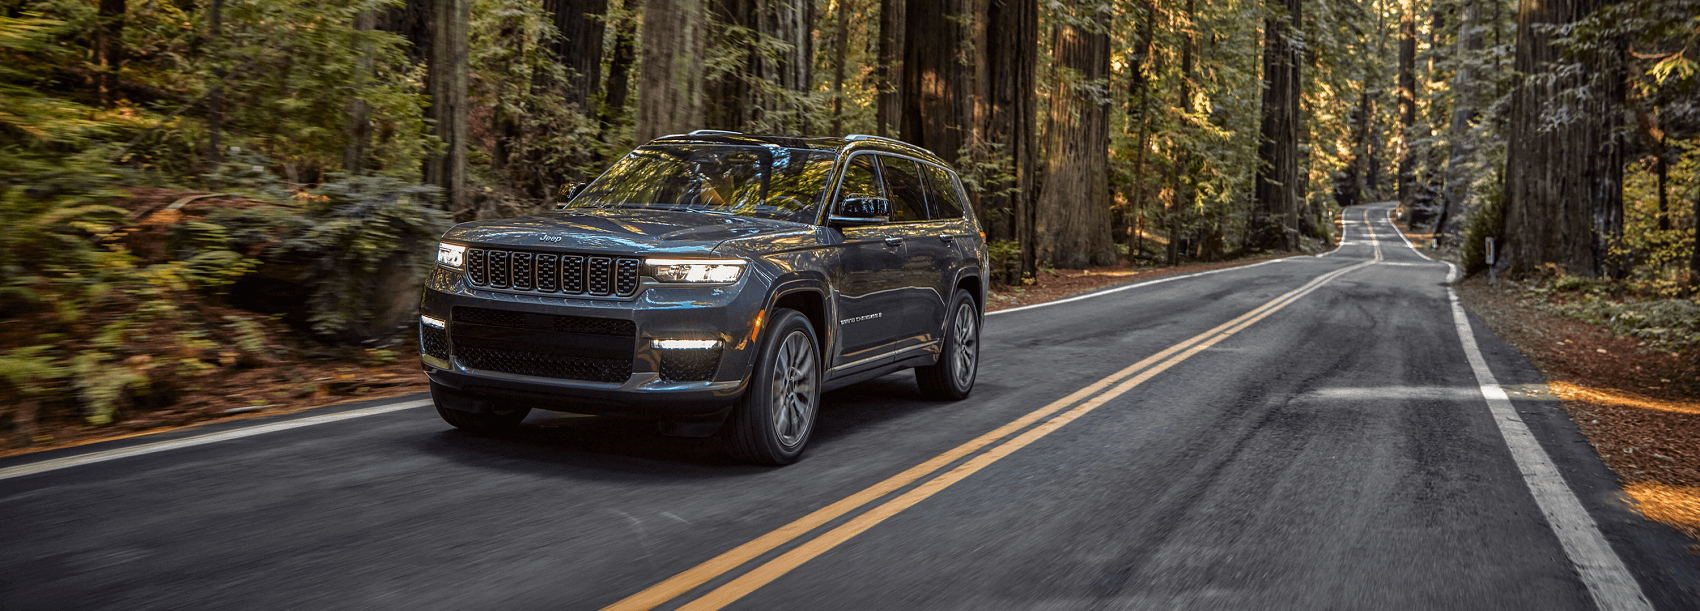 Jeep Grand Cherokee L Lease Deals